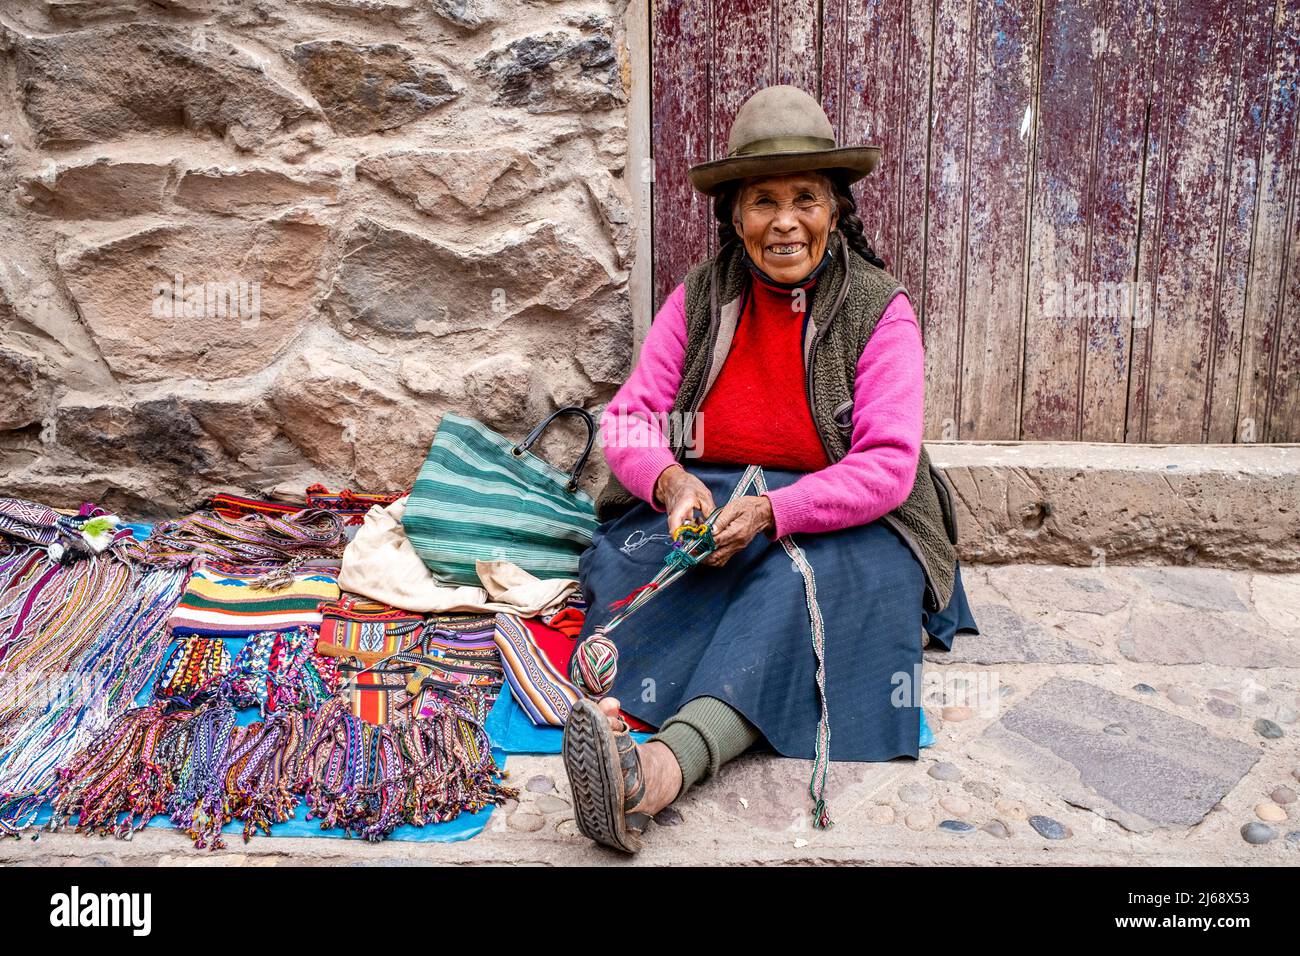 An Indigenous Woman Showing The Traditional Method Of Weaving Wool In The Town Of Pisac, The Sacred Valley, Calca Province, Peru. Stock Photo